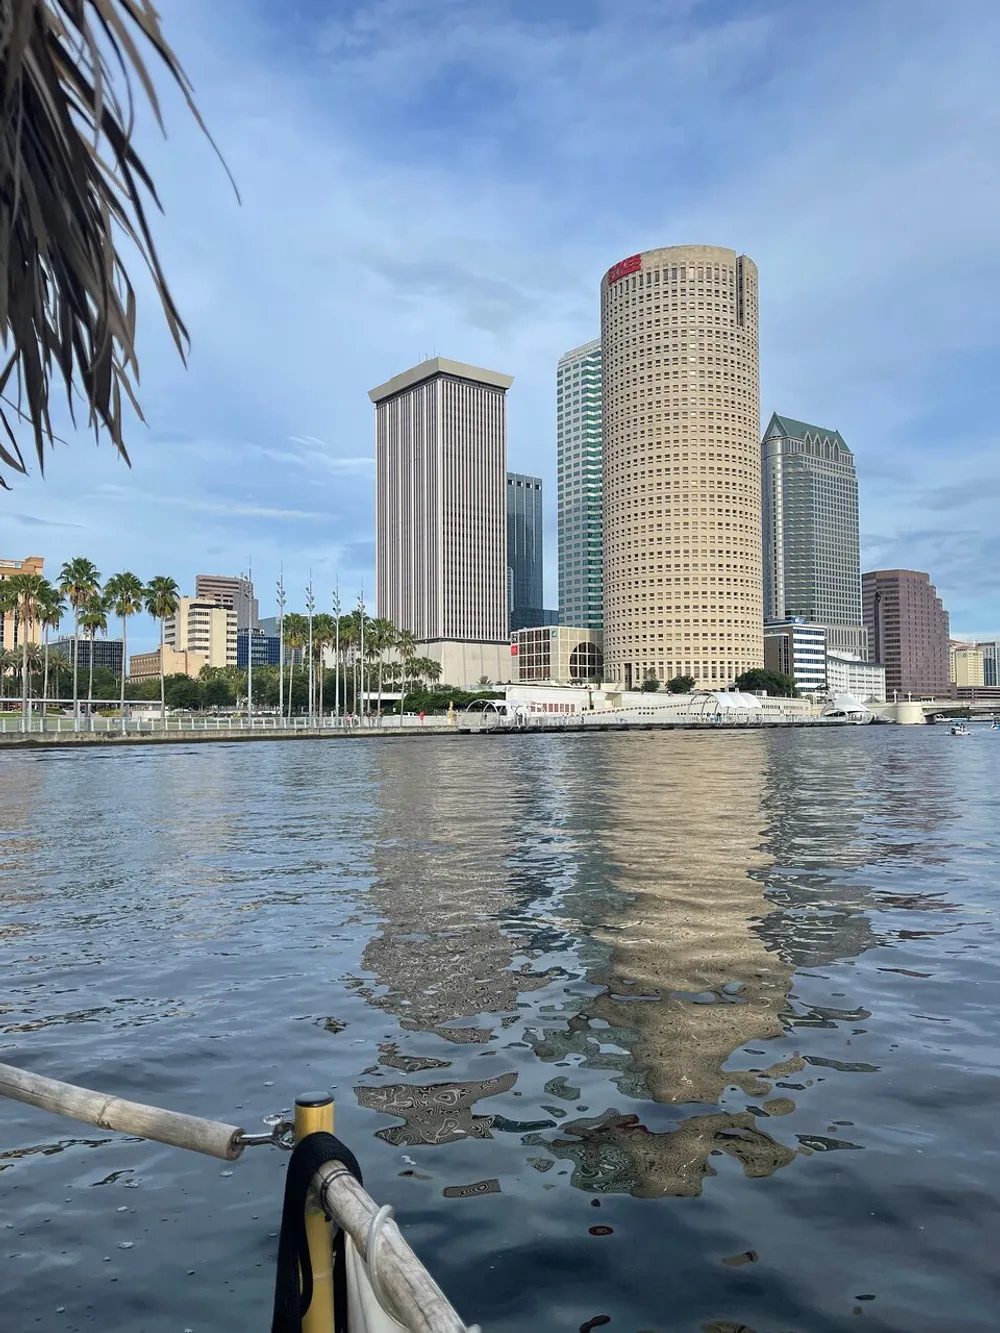 The image shows a waterfront view of a city skyline with towering skyscrapers and their reflections in the calm water taken from behind a partial palm frond and a boats railing